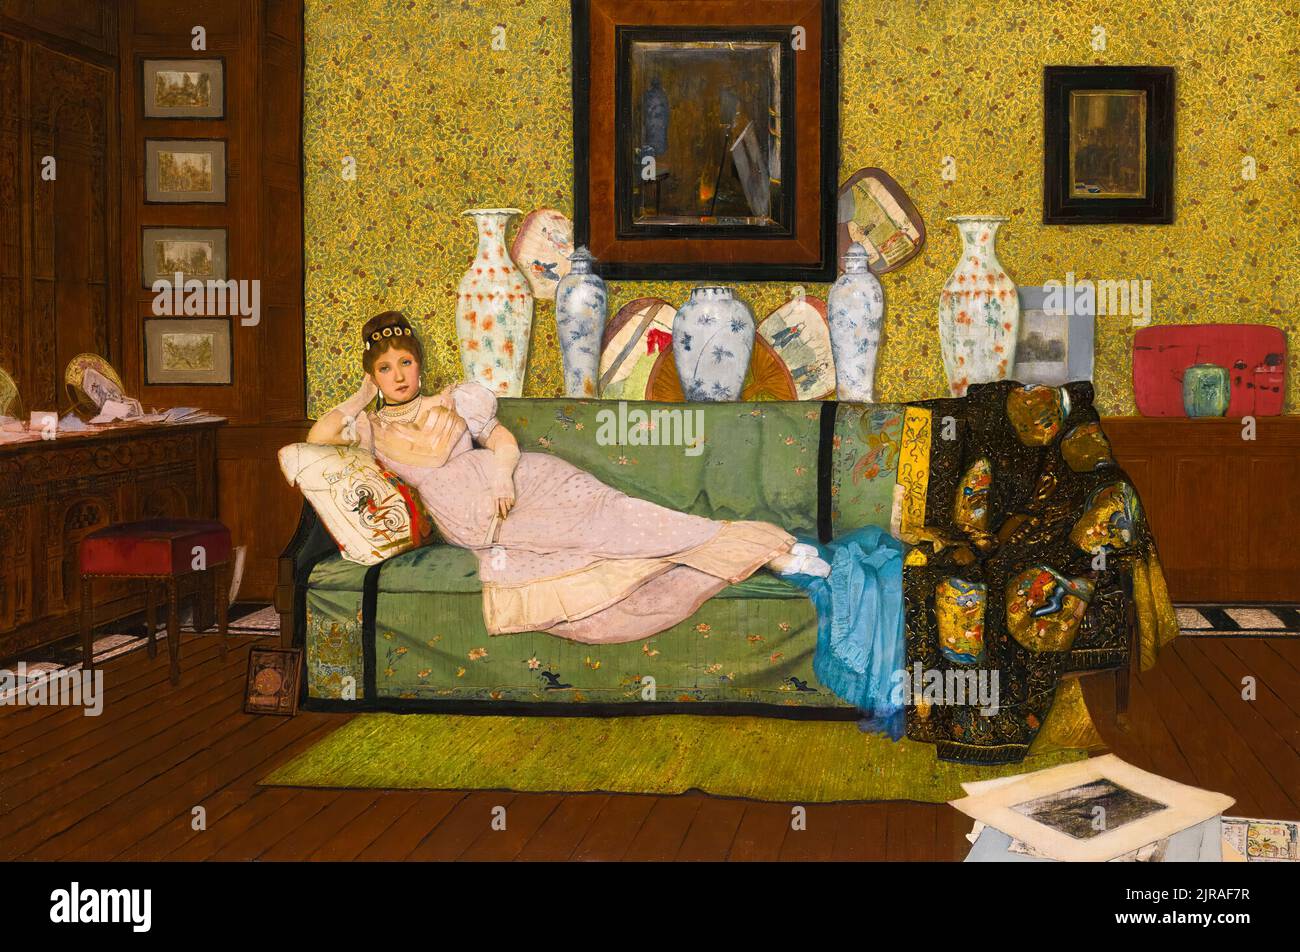 John Atkinson Grimshaw, A Reverie, In the Artist's House, painting in oil on canvas, 1878 Stock Photo